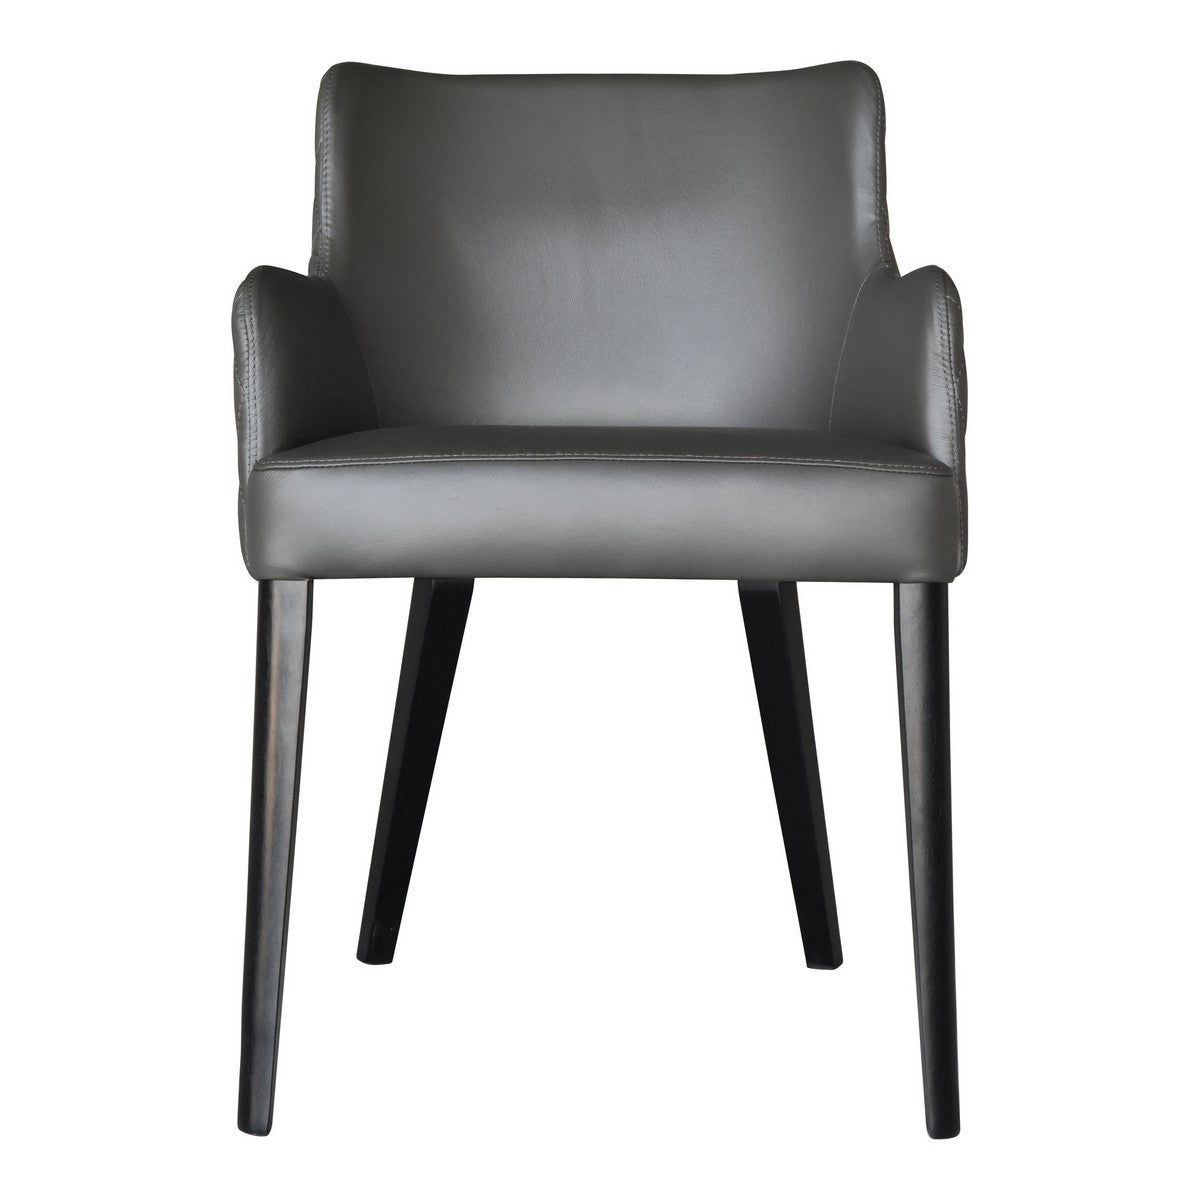 Moe's Home Collection Zayden Dining Chair Grey - GO-1004-29 - Moe's Home Collection - Dining Chairs - Minimal And Modern - 1